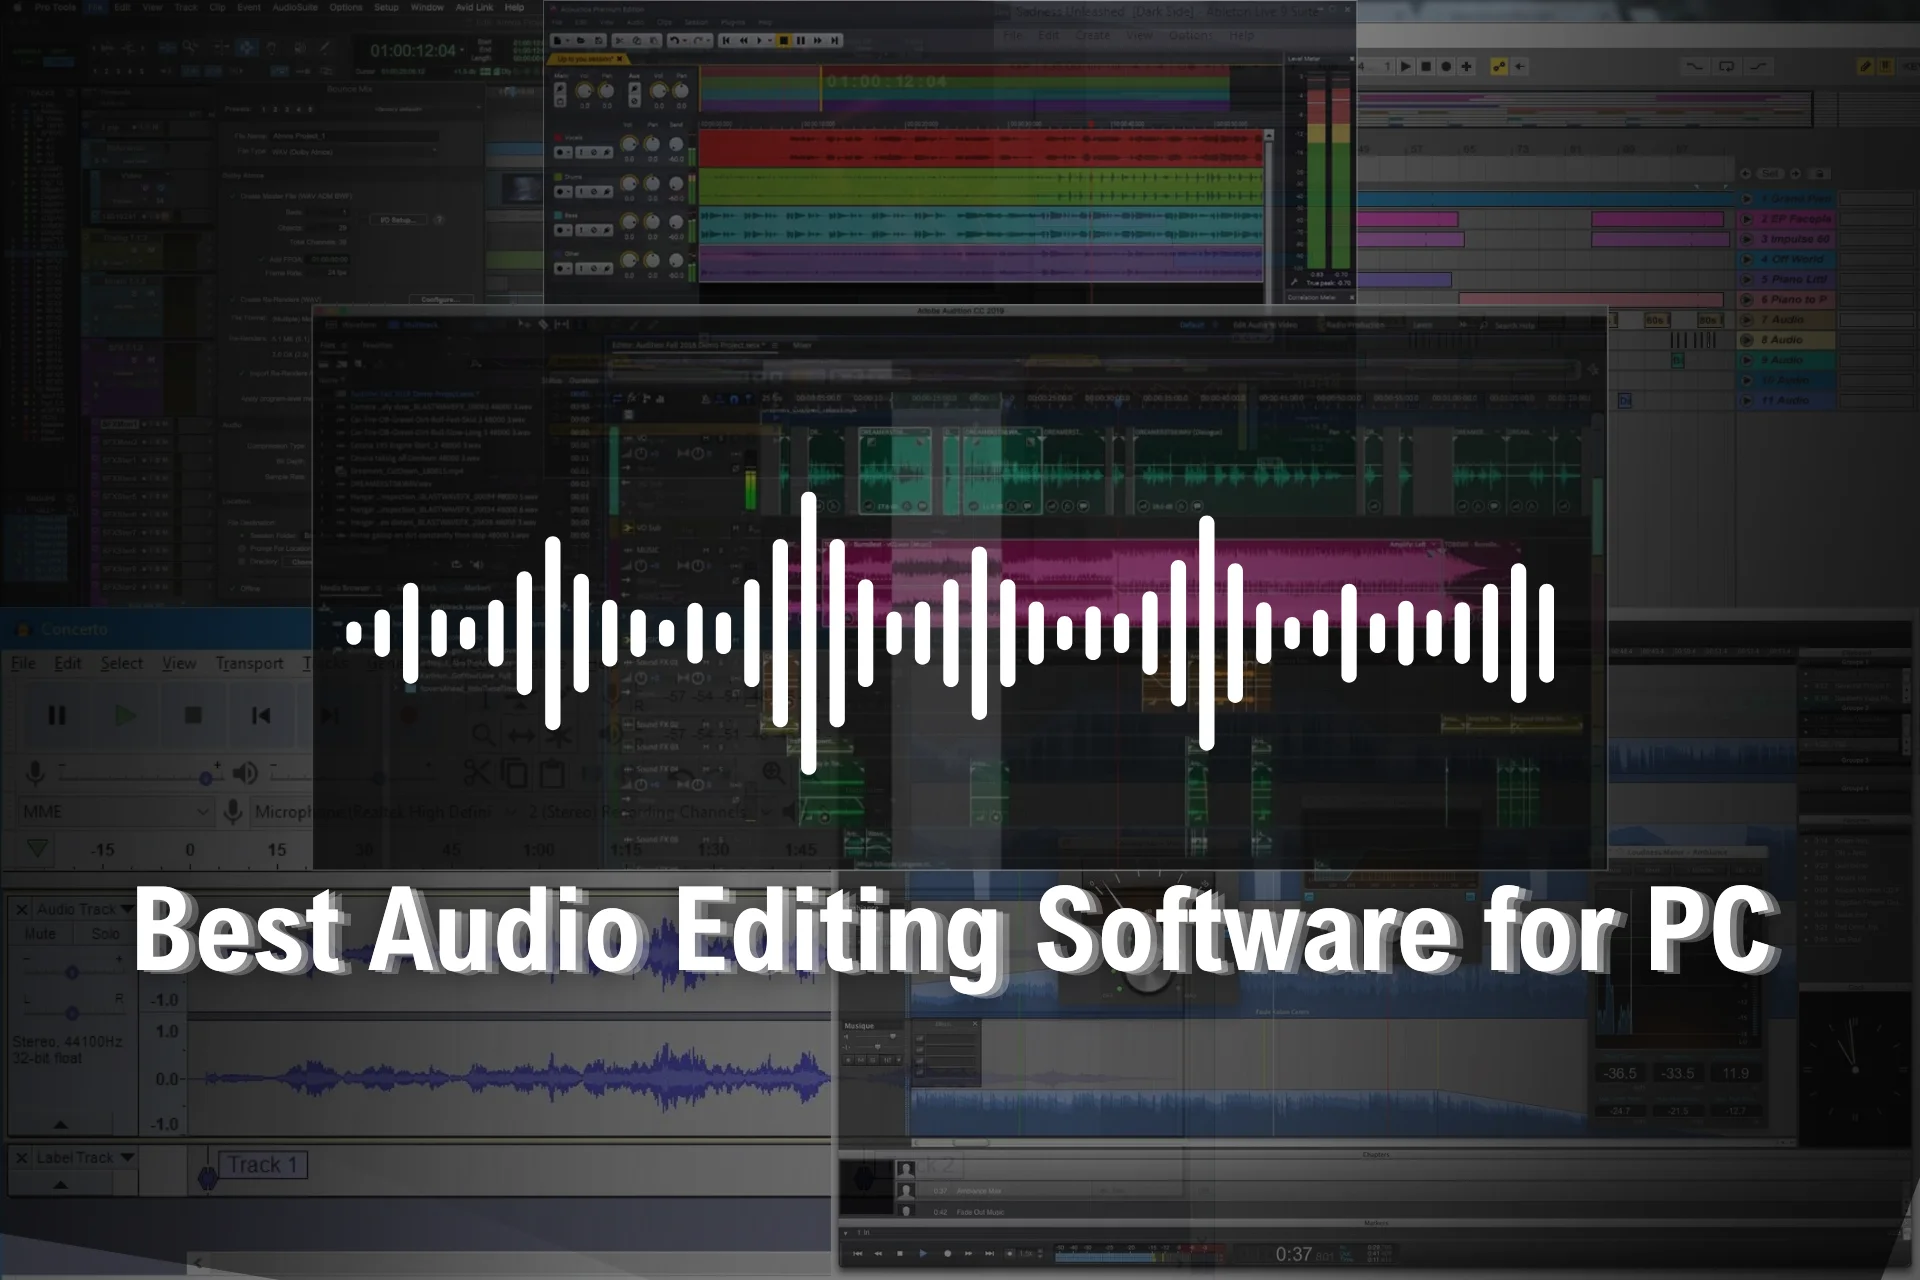 audio editing software for PC